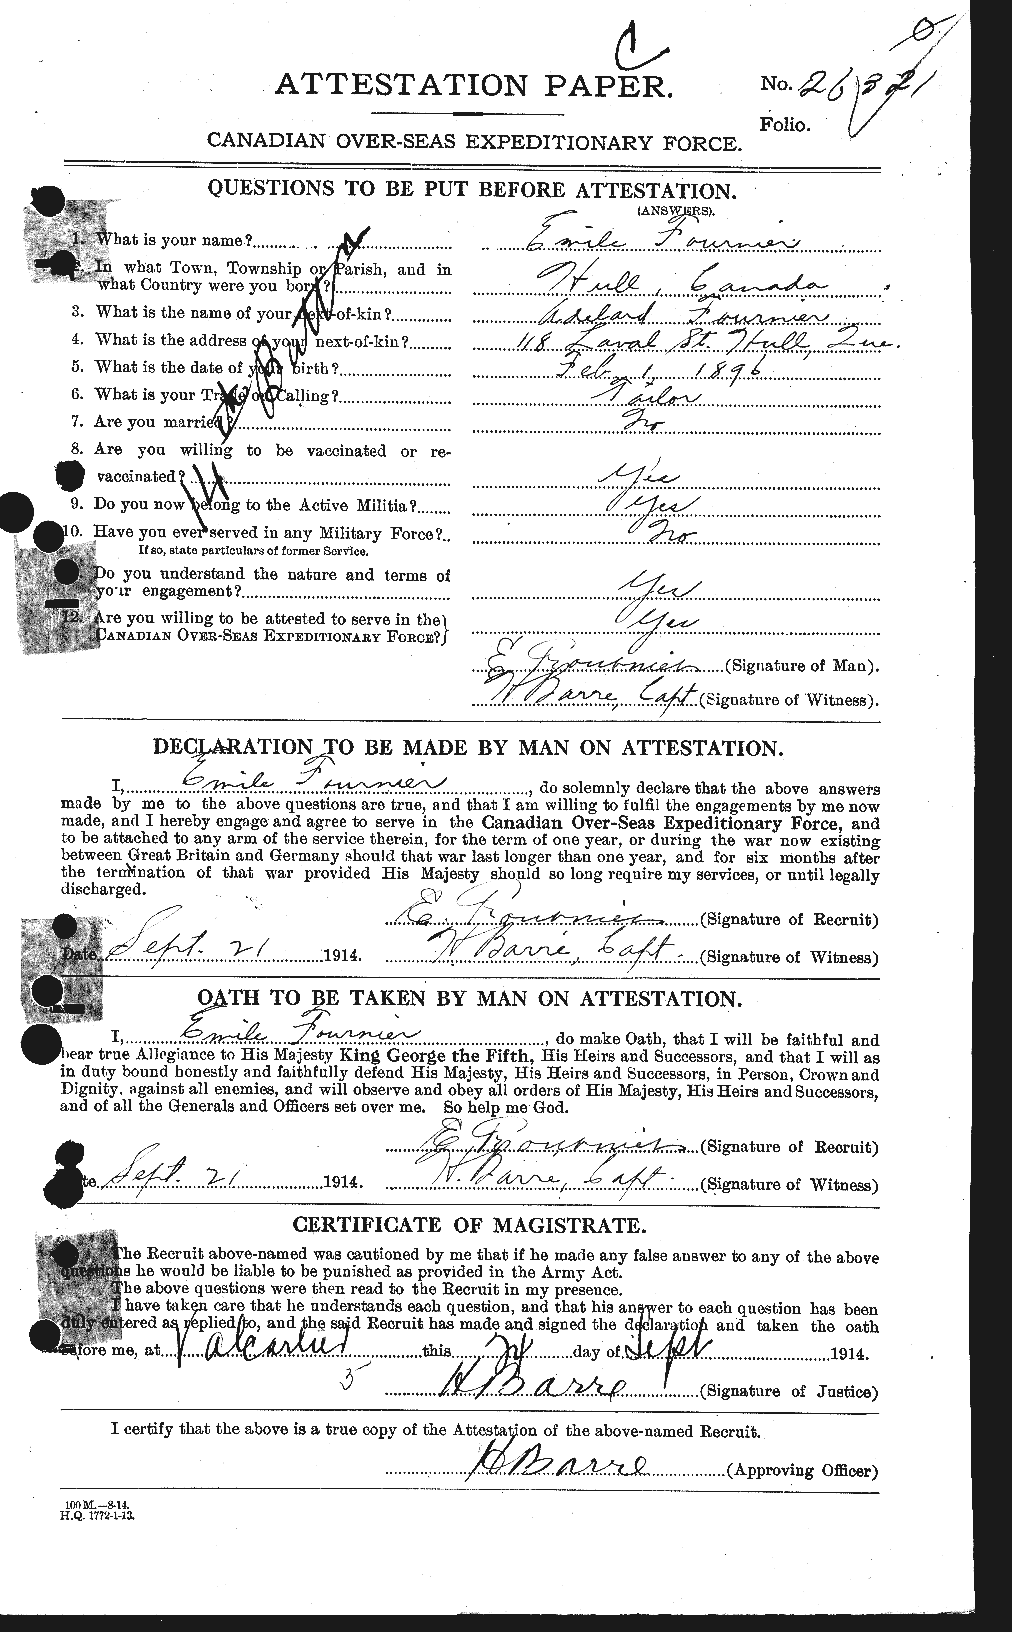 Personnel Records of the First World War - CEF 331113a